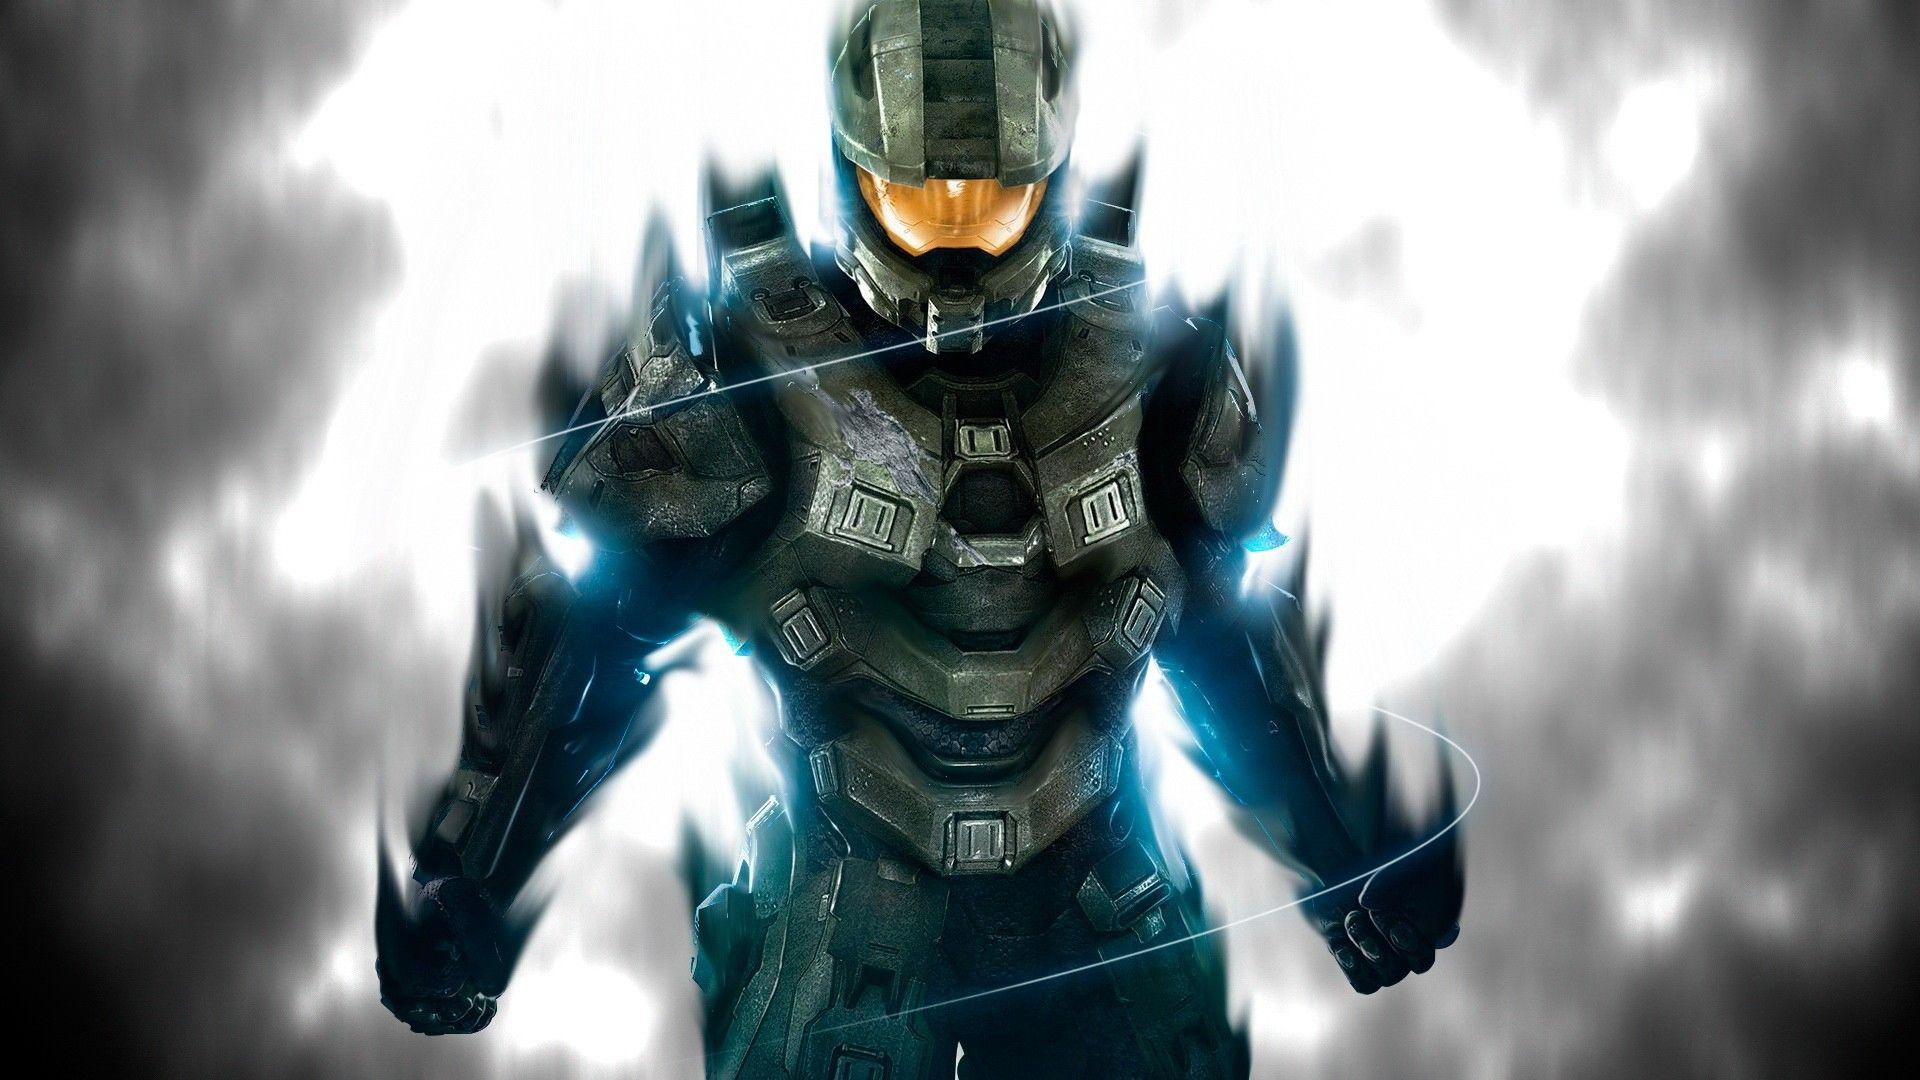 Download the Halo 4 Master Chief Wallpaper, Halo 4 Master Chief